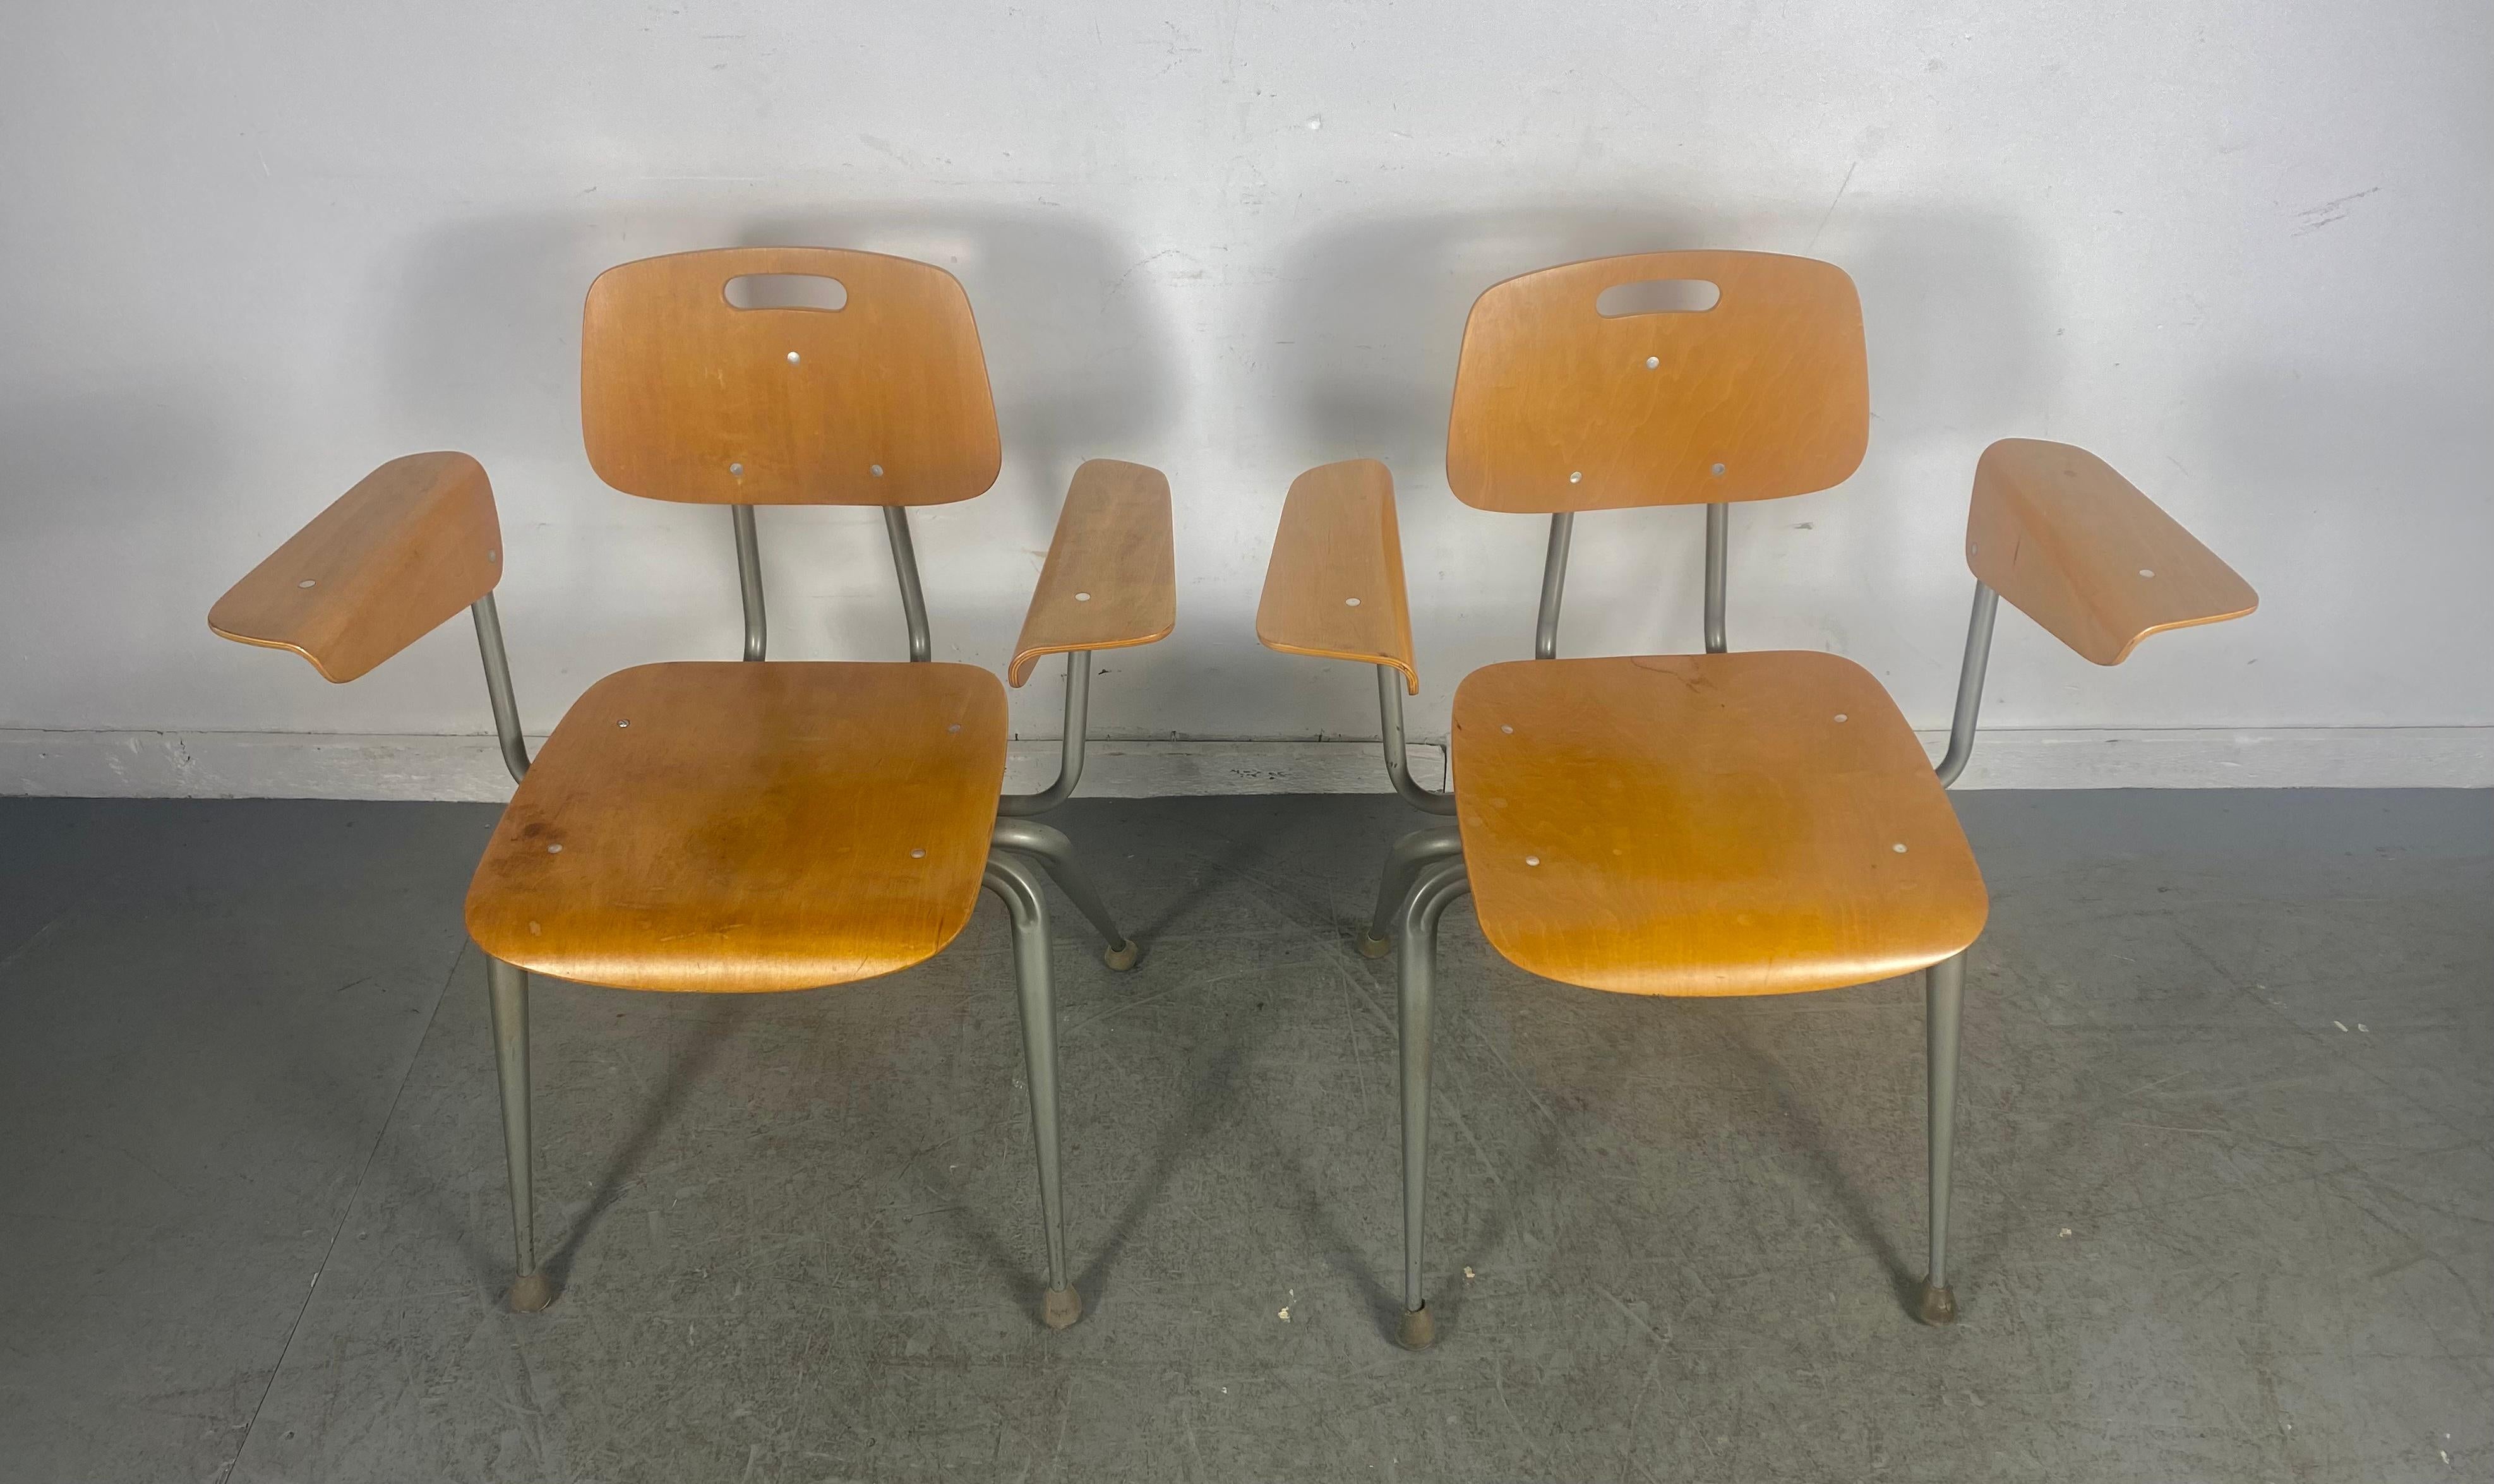 Matched Pair Modernist Jean Prouve Style Plywood Arm Chairs by Brunswick In Good Condition For Sale In Buffalo, NY